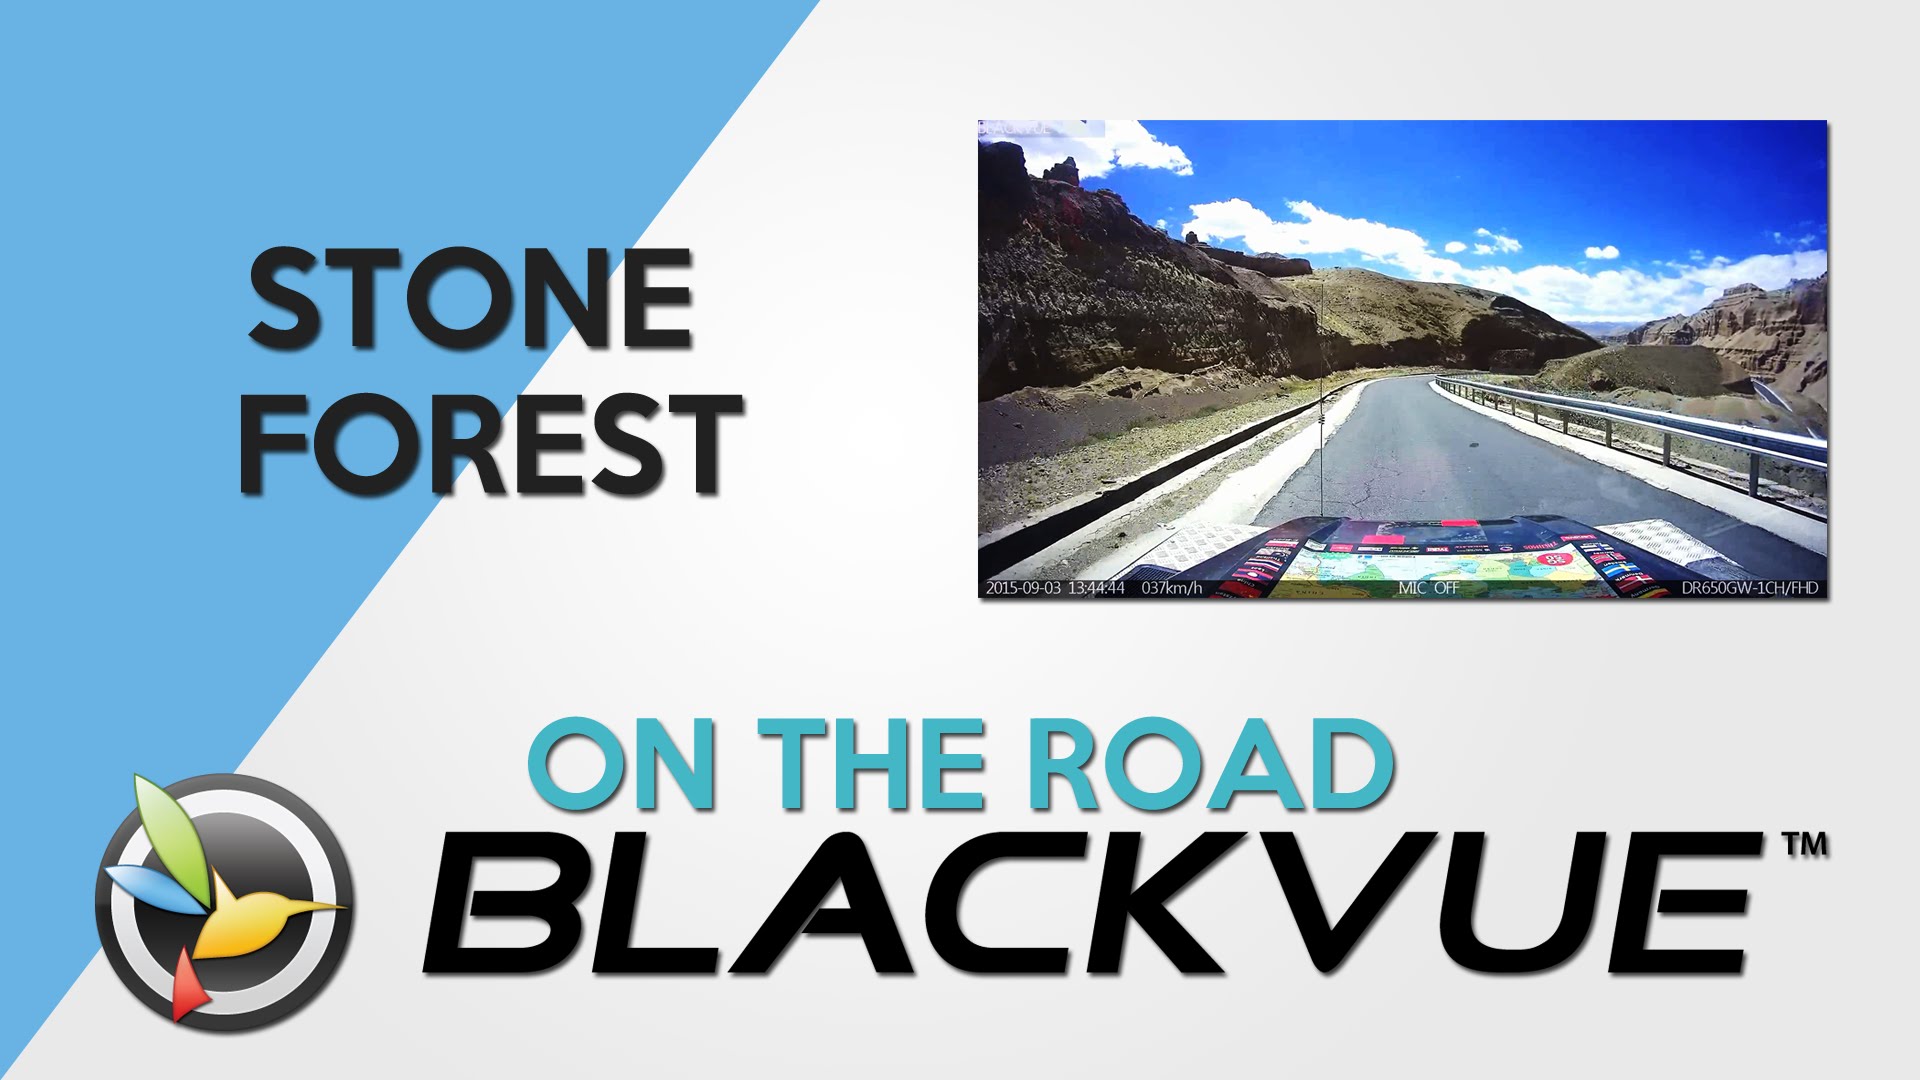 BLACKVUE ON THE ROAD: Stone Forest at the Roof of the World